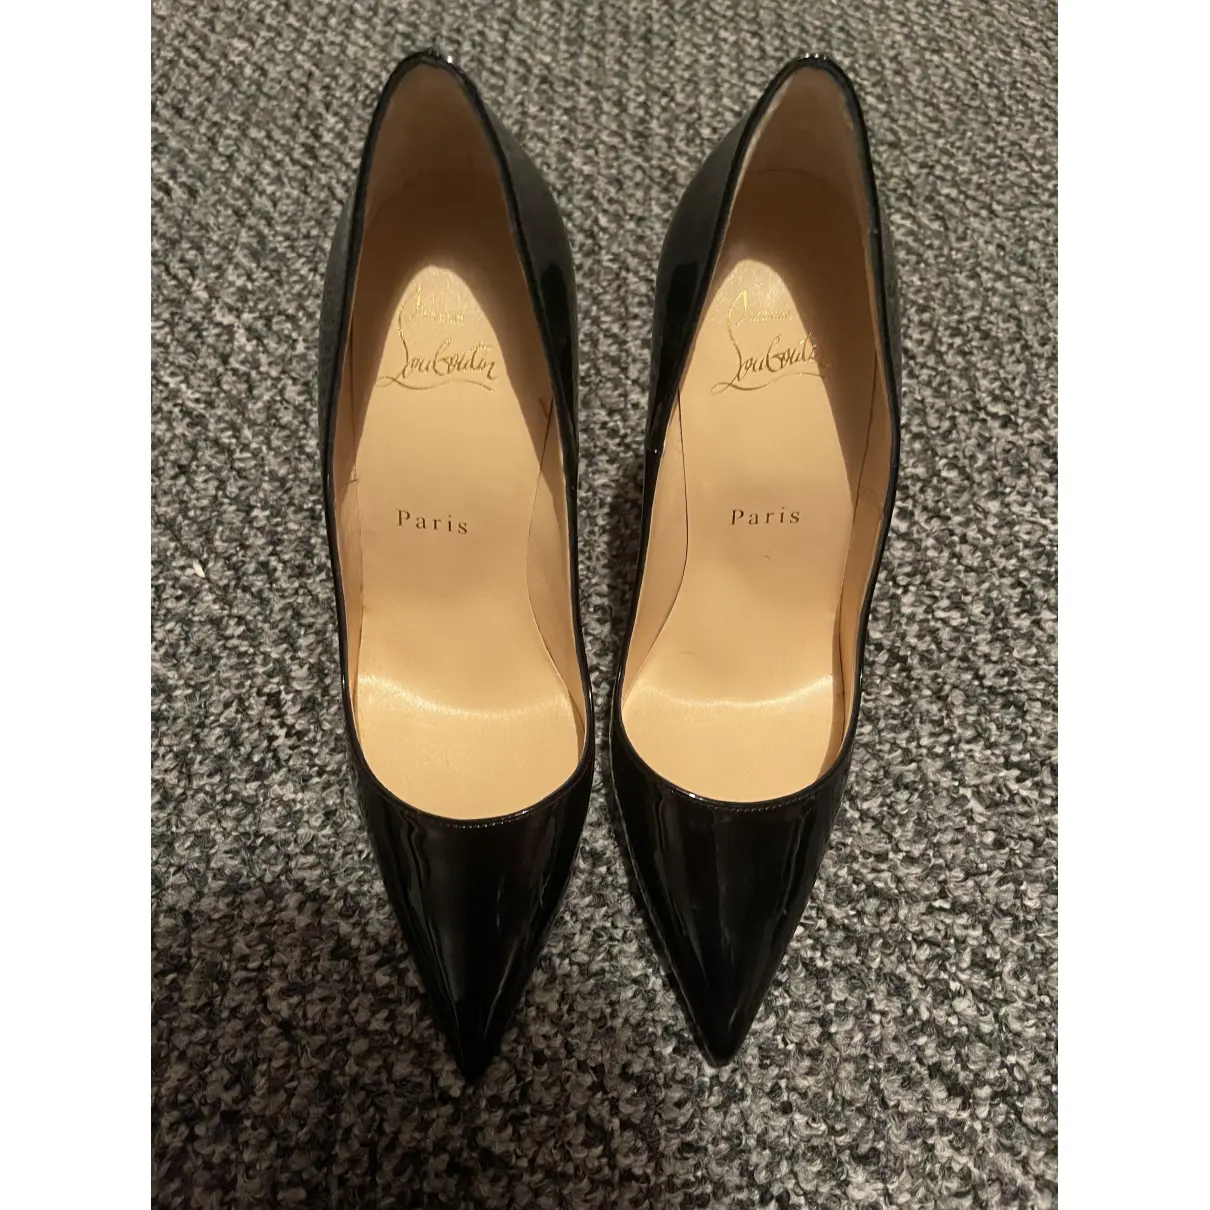 Buy Christian Louboutin So Kate patent leather heels online